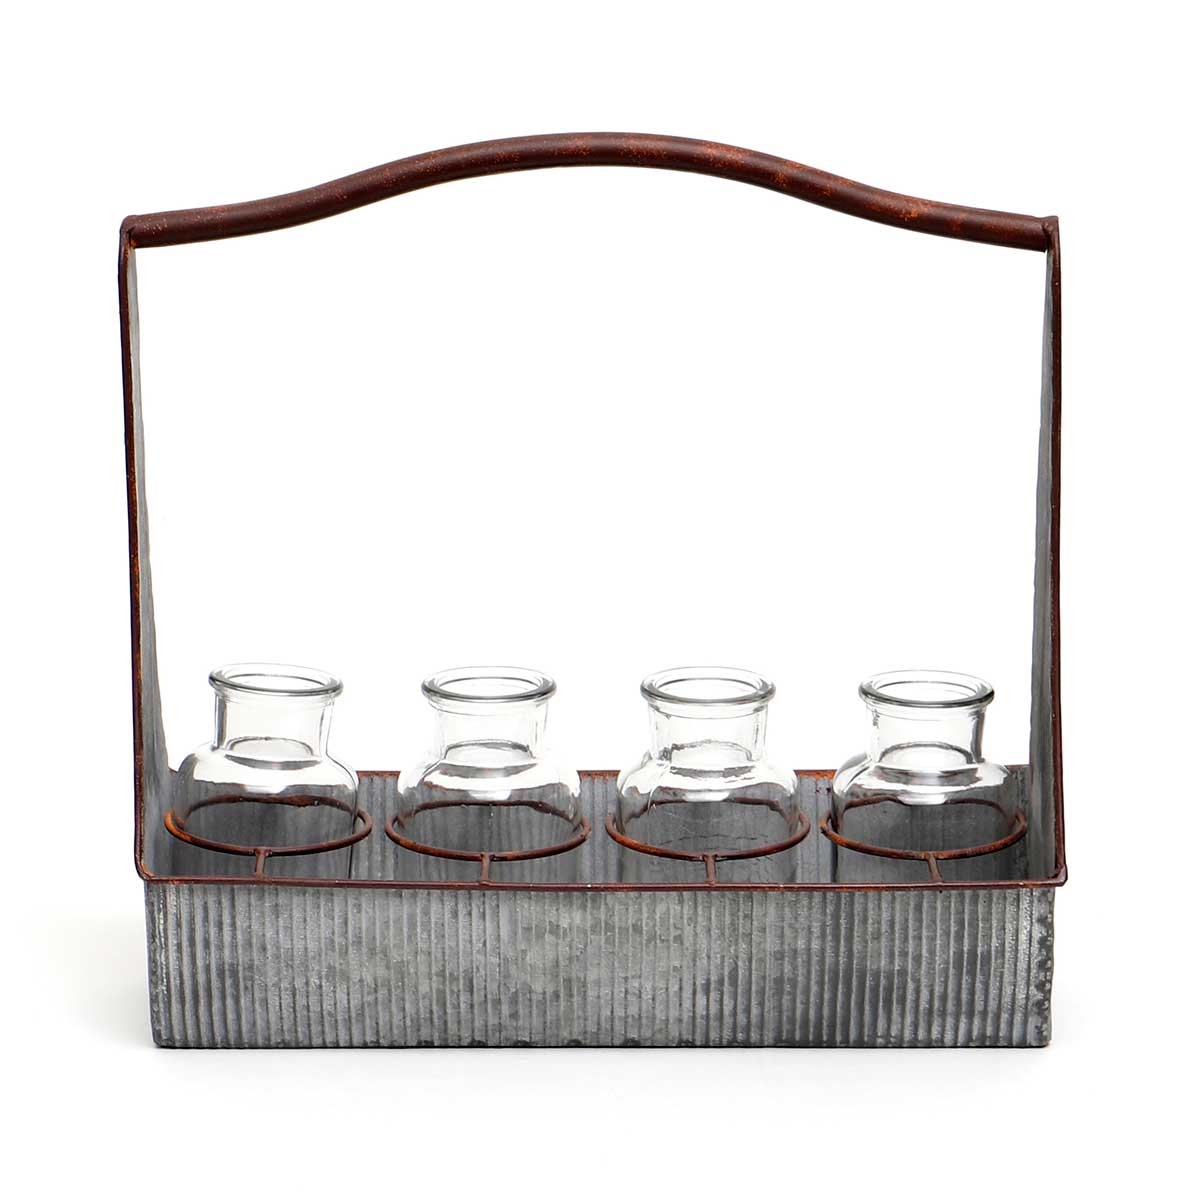 IN BLOOM METAL CARPENTER TRAY WITH 4 GLASS BOTTLES